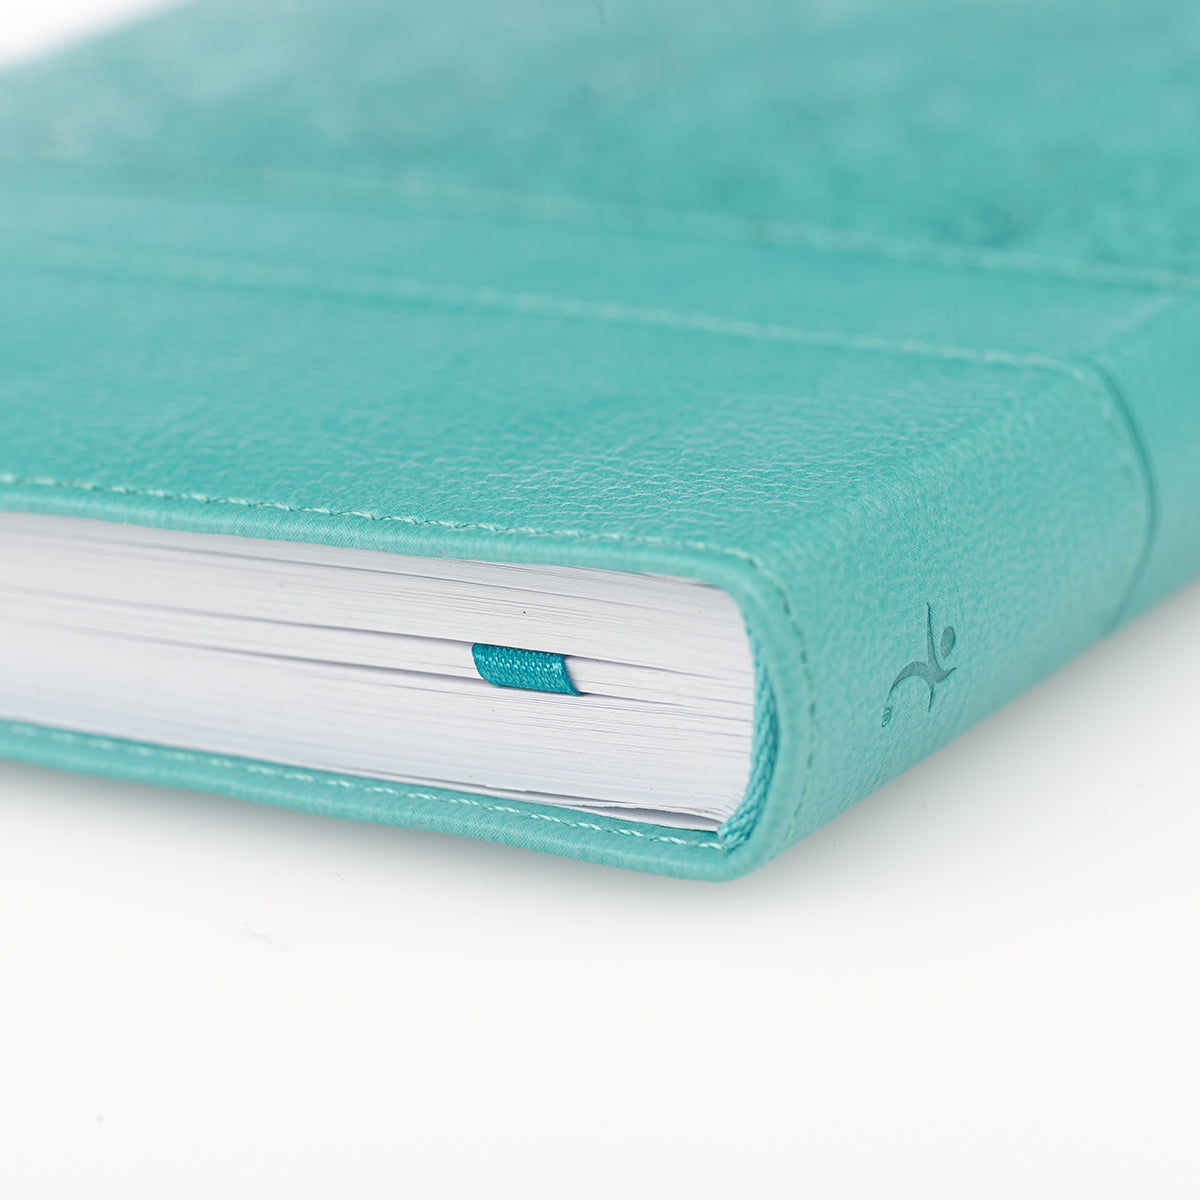 Image of Journal-Everlasting Love-Handy Size-Turquoise LuxLeather other